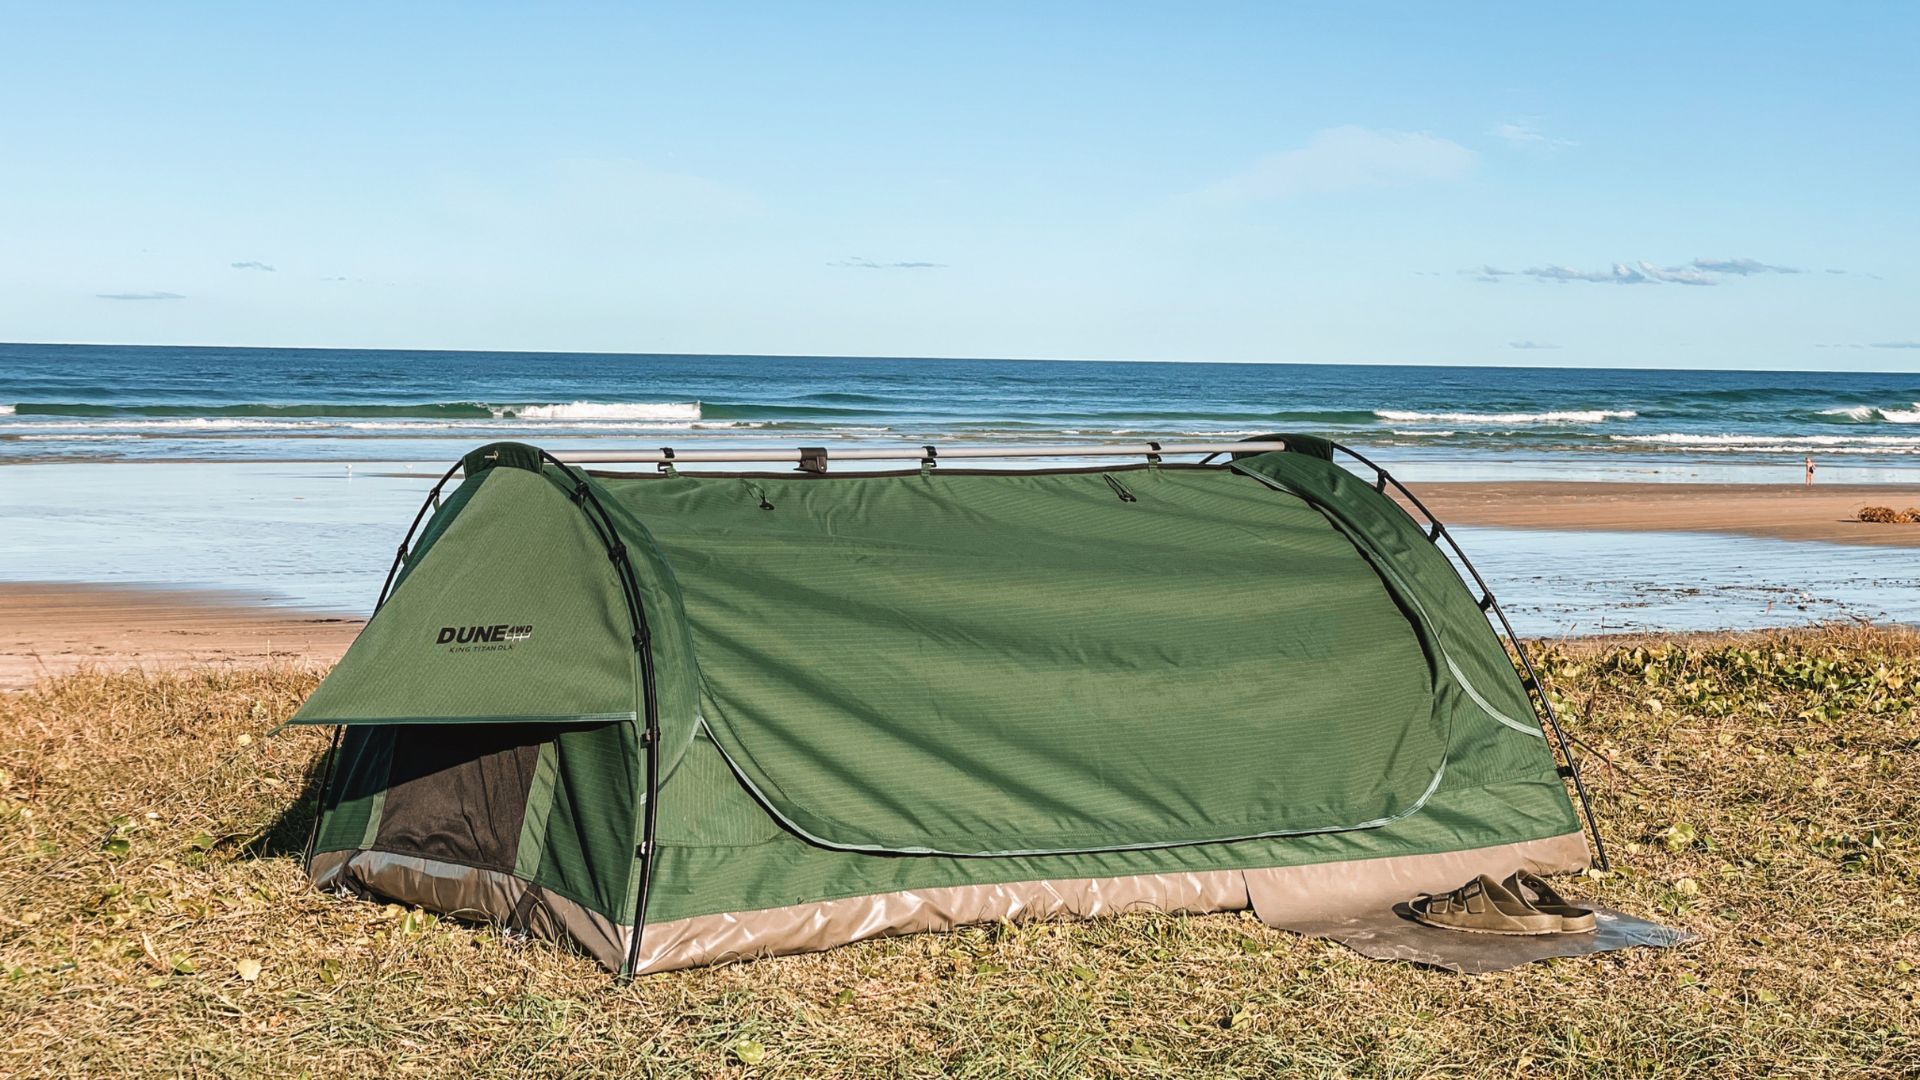 Dune 4WD King Titan Deluxe Olive Double Swag by the beach